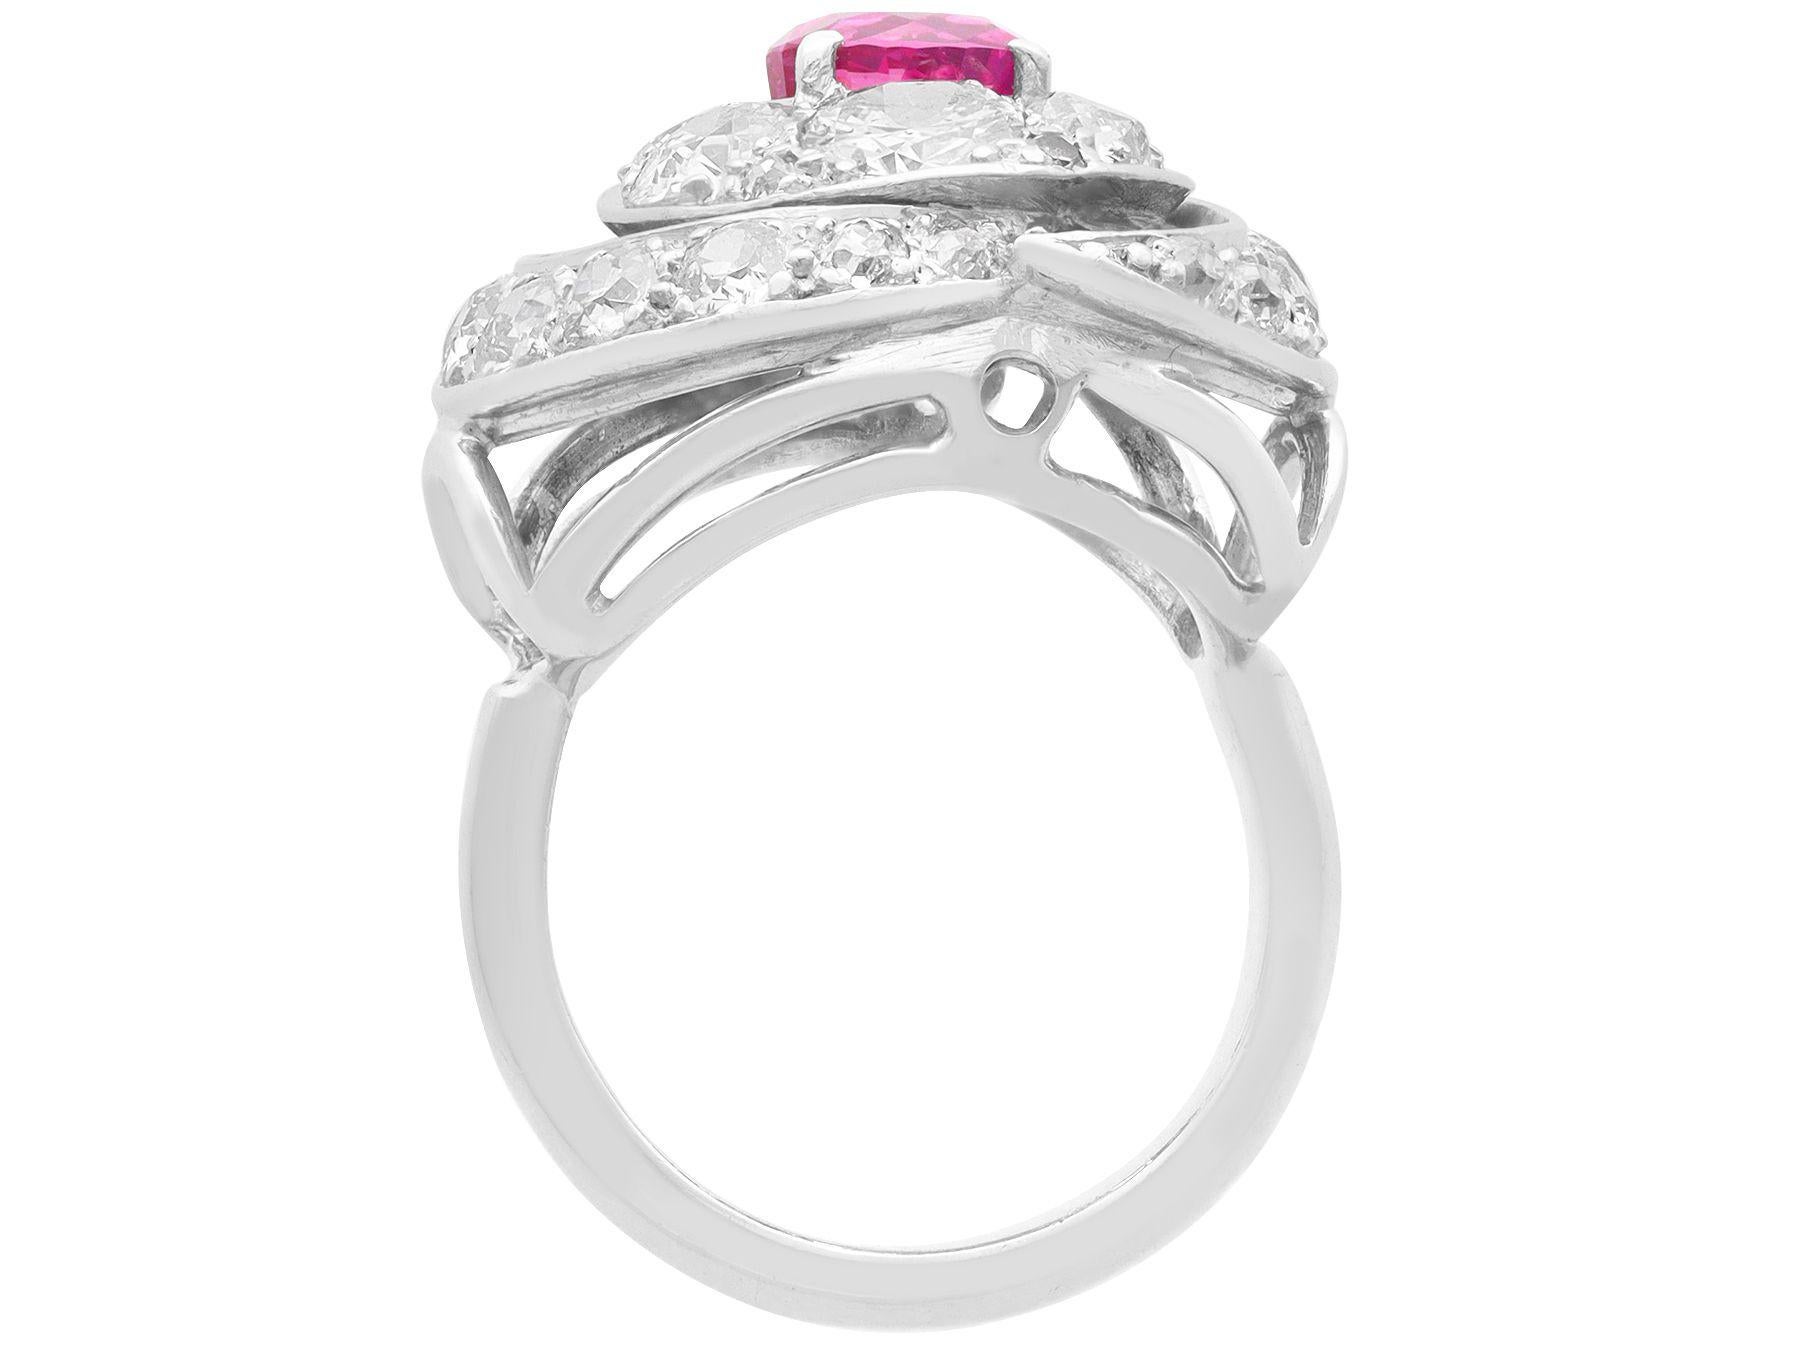 Women's or Men's 1.22 Carat Pink Sapphire and 2.73 Carat Diamond Ring For Sale